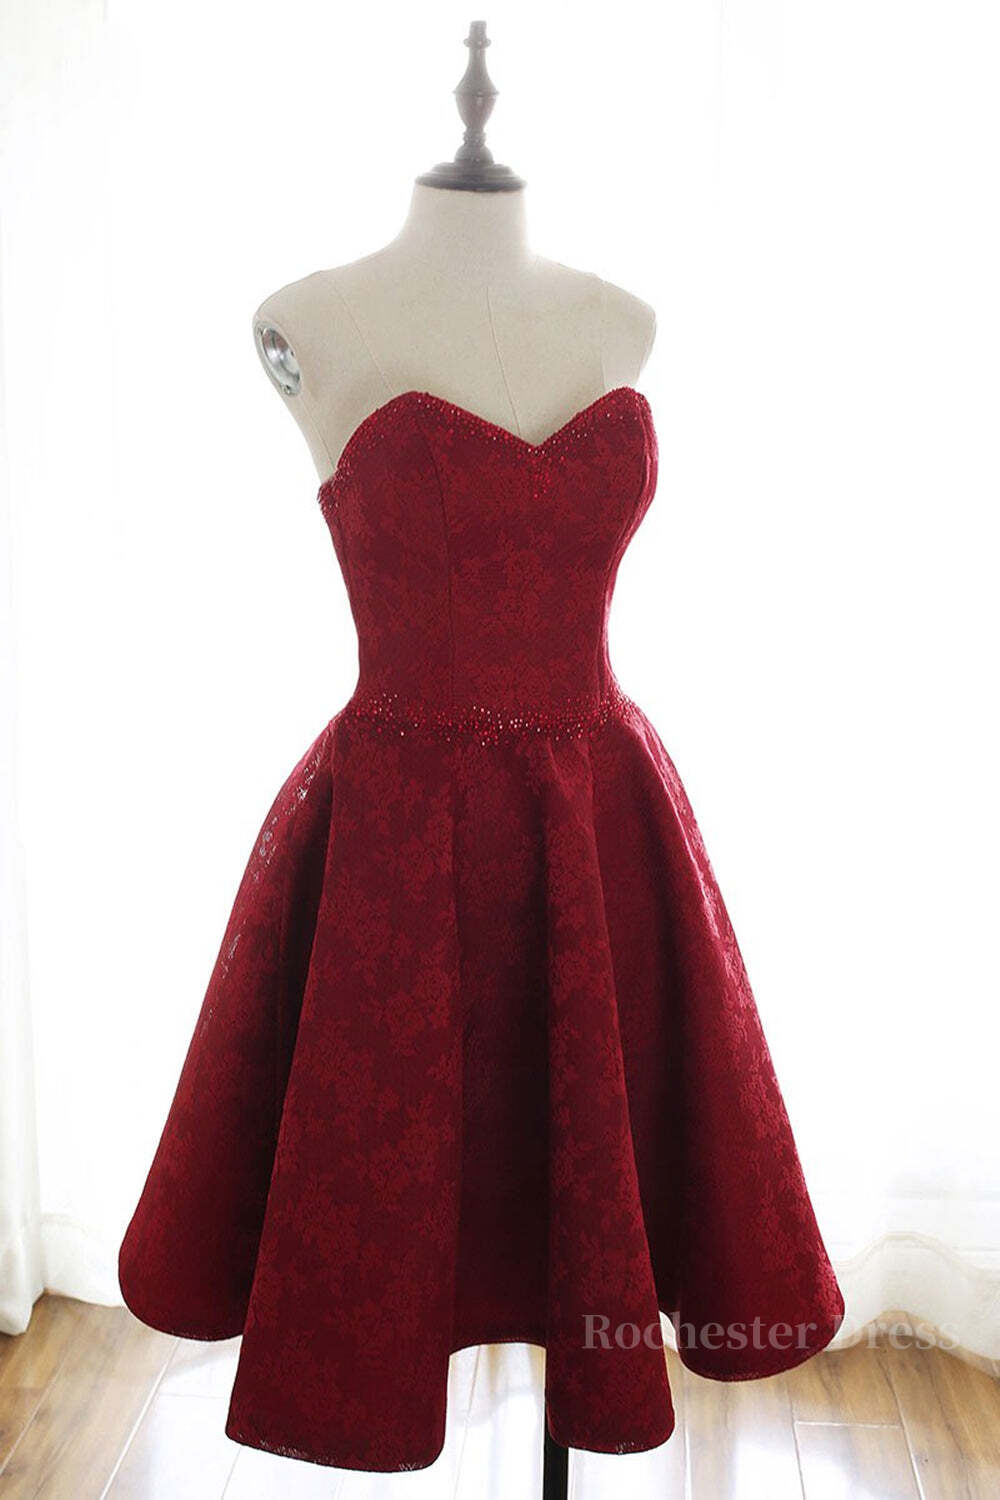 Strapless Backless Burgundy Lace Short Prom Dress, Short Burgundy Lace Homecoming Dress